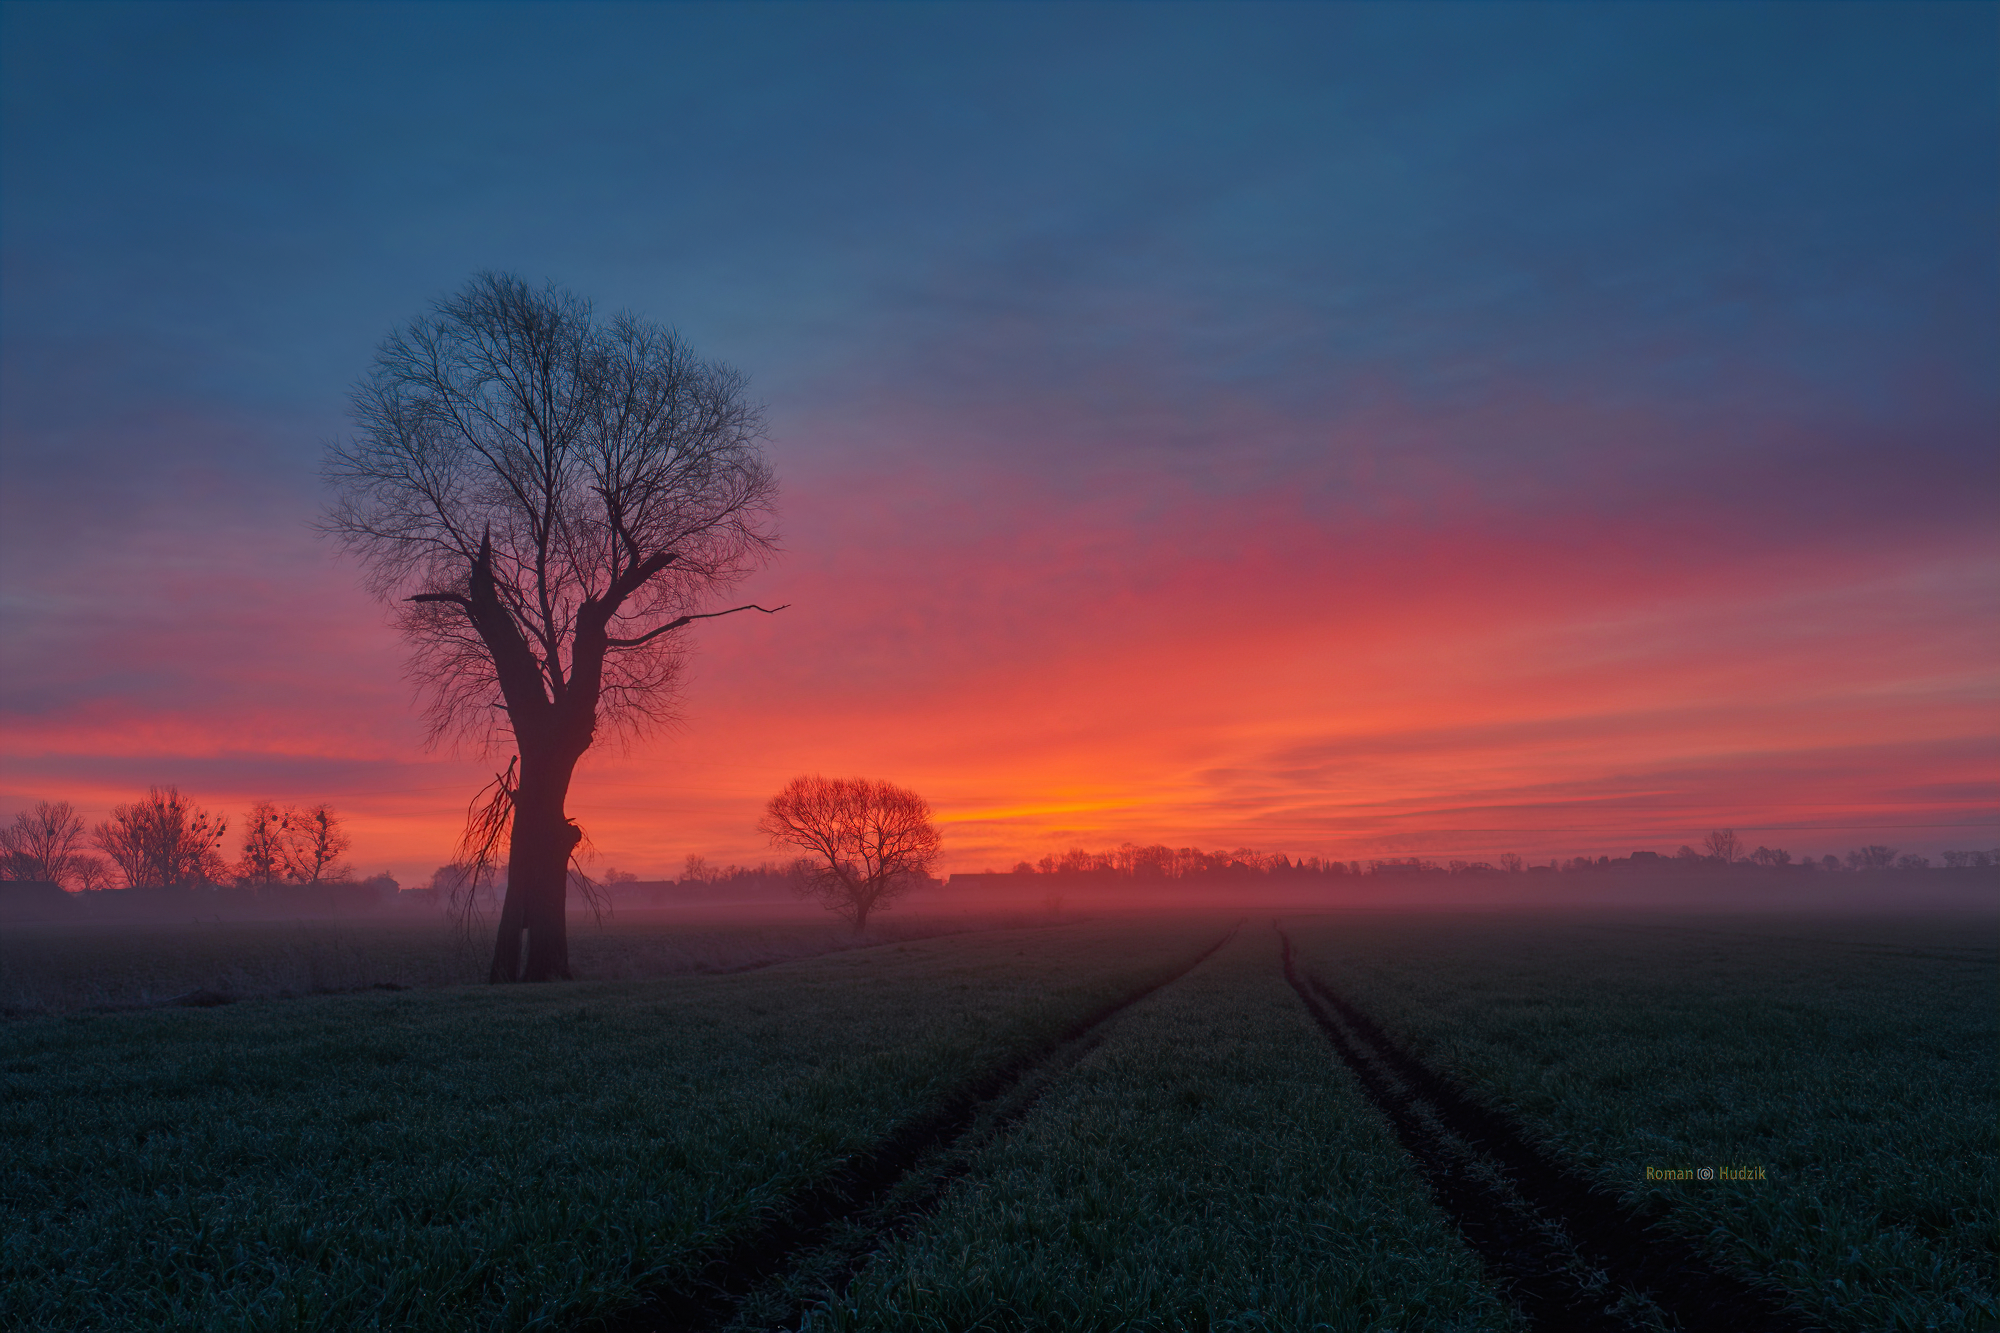 General 2000x1333 landscape mist photography sunset cold winter field trees nature outdoors Roman Hudzik low light watermarked